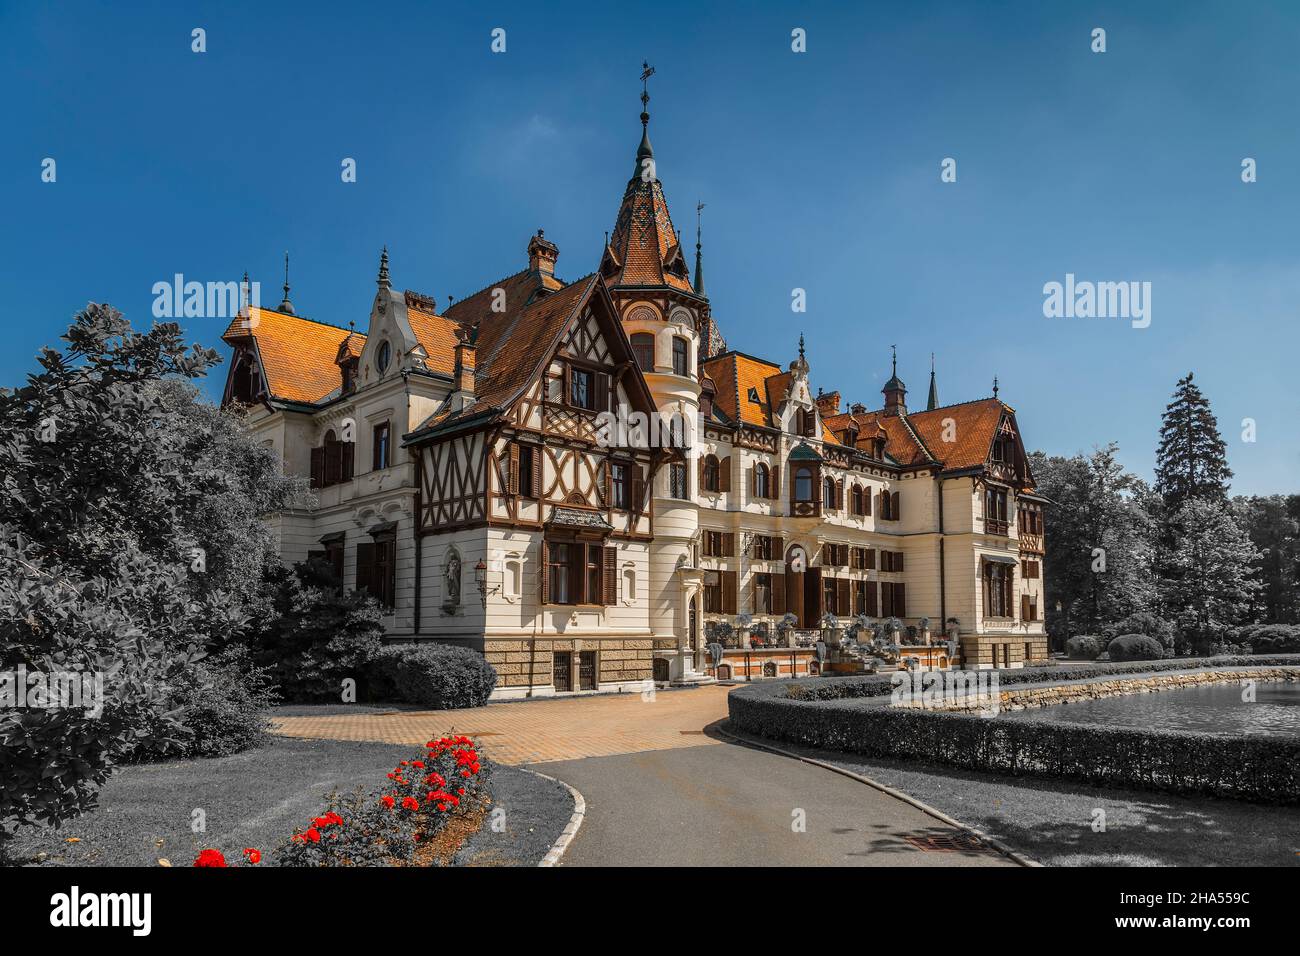 The castle of Leshna was built according to the design of the Viennese architect Johann Mick in 1893. Zlín. Czech Republic Stock Photo